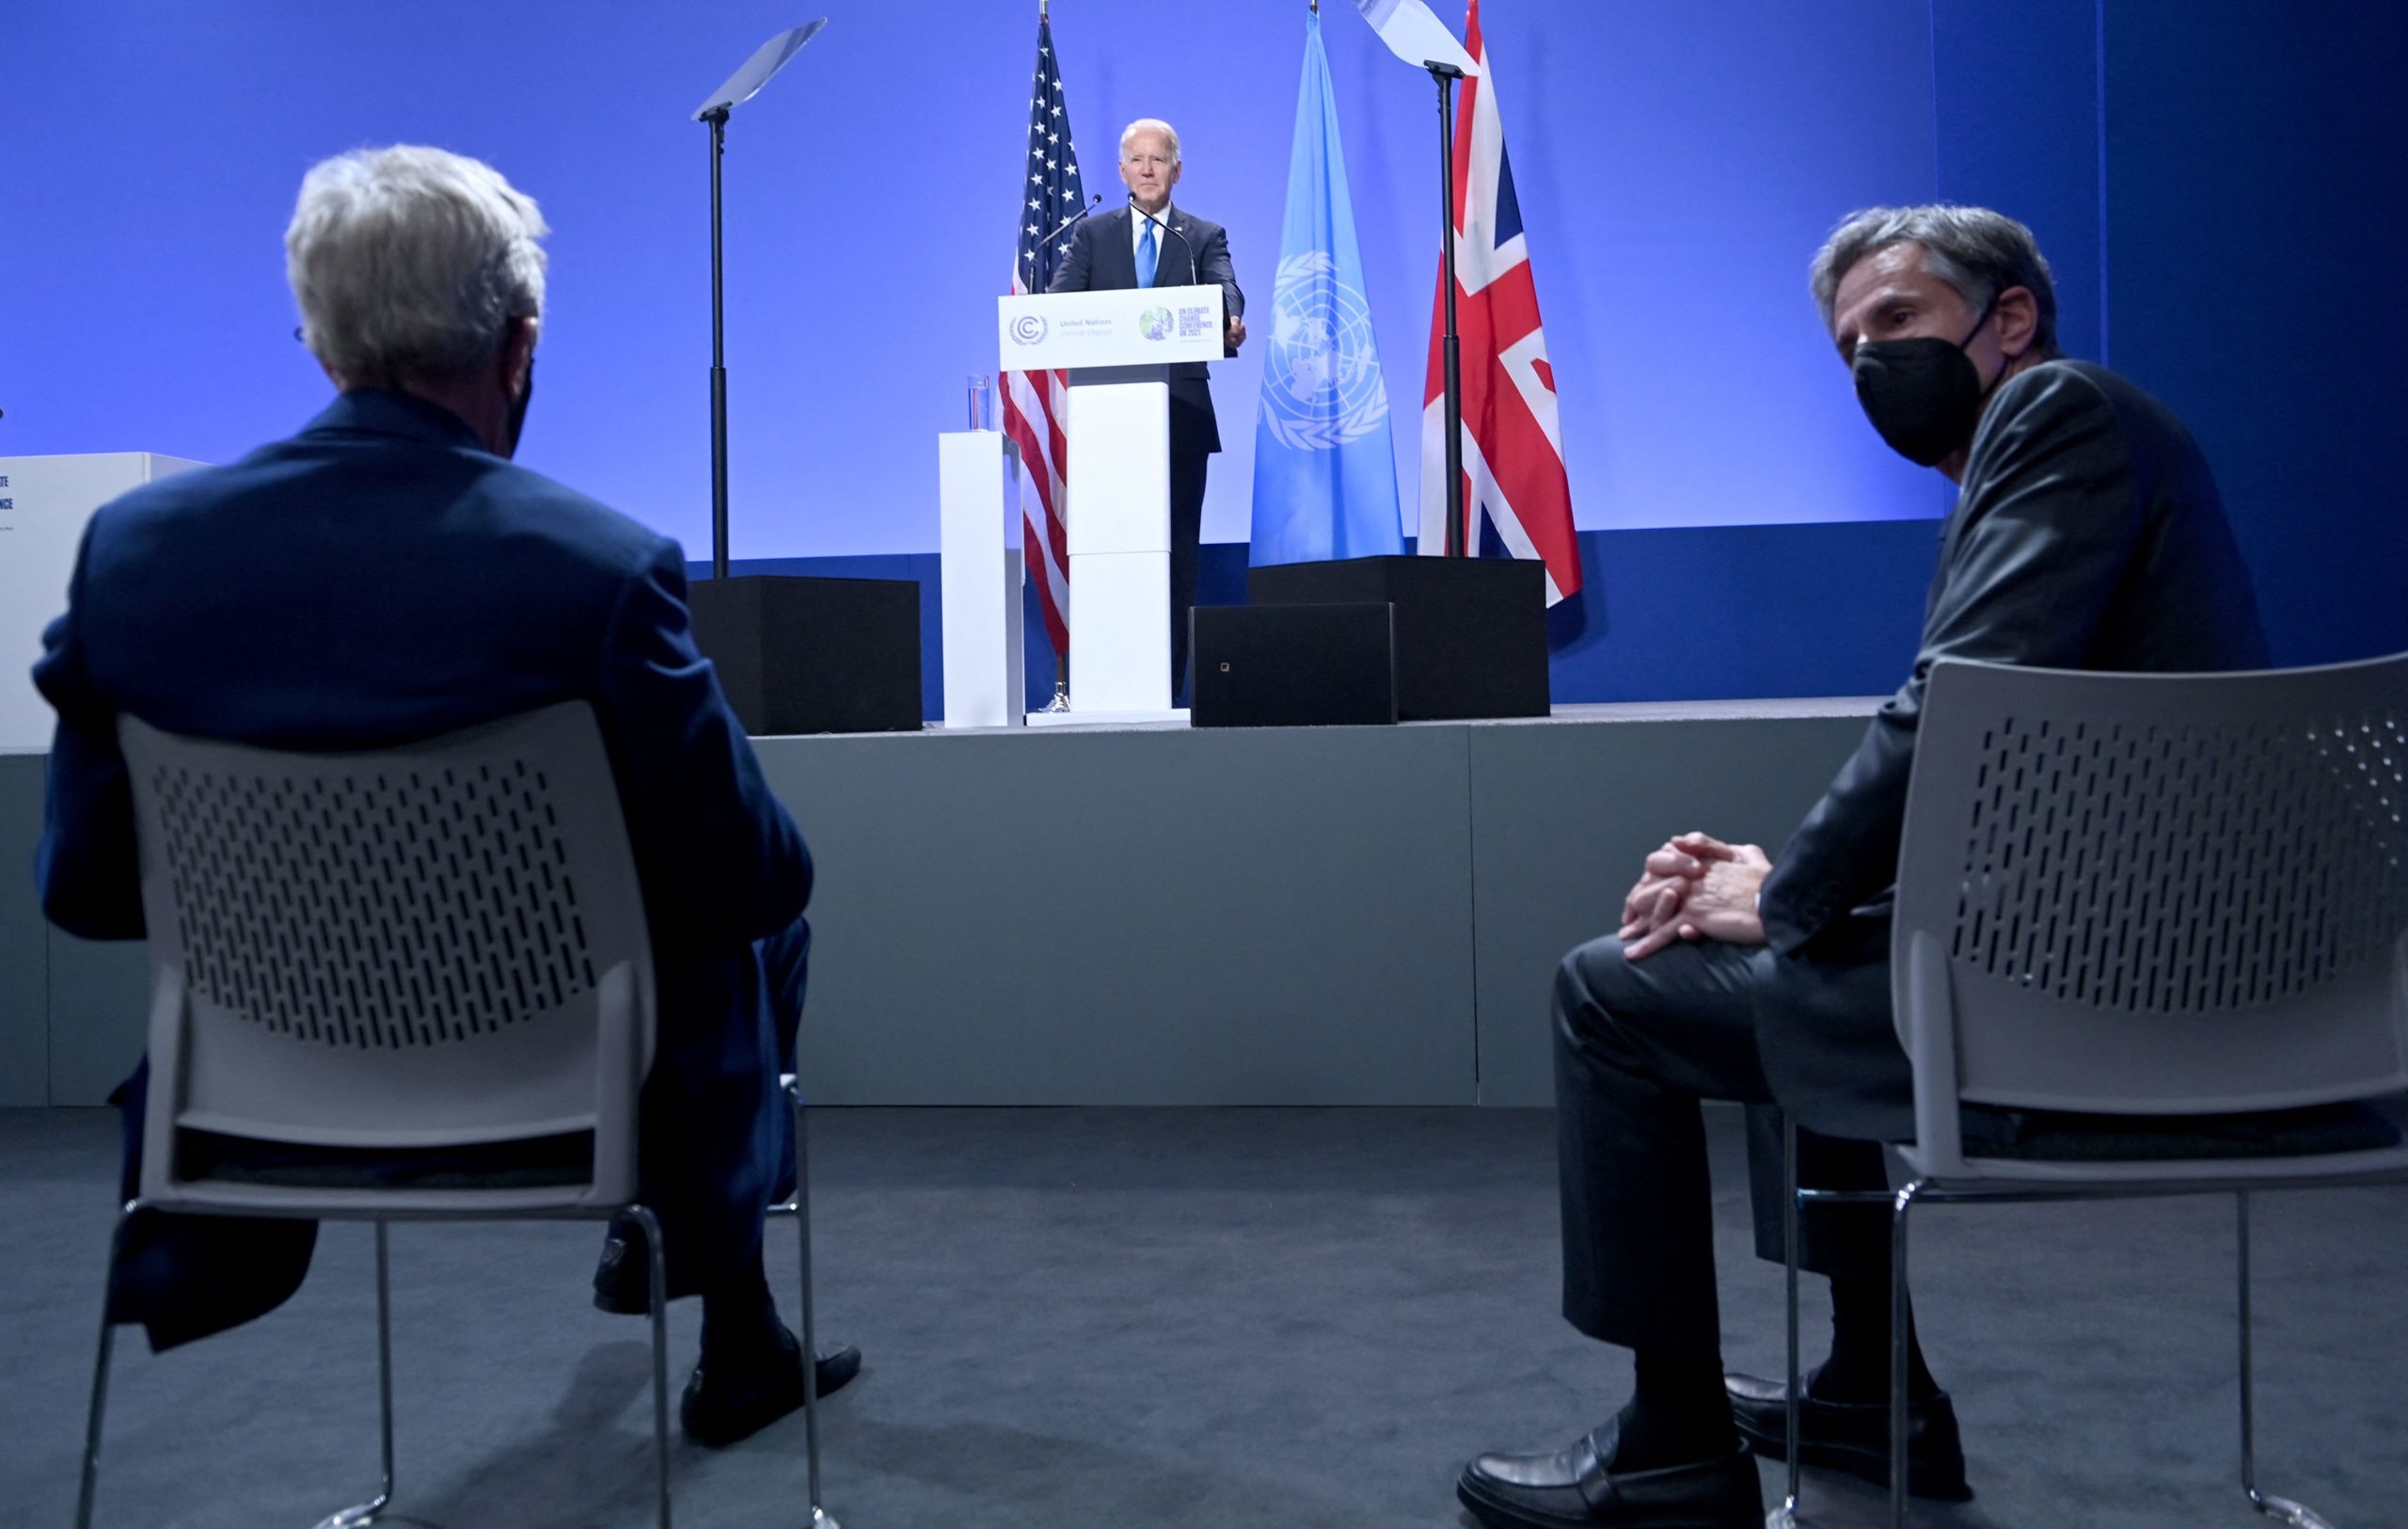 President Joe Biden addresses a press conference as Secretary of State Antony Blinken U.S. Special Presidential Envoy for Climate John Kerry listen during the recent COP26 Climate Change Conference in Scotland on Nov. 2. (Brendan Smialowski/AFP via Getty Images)